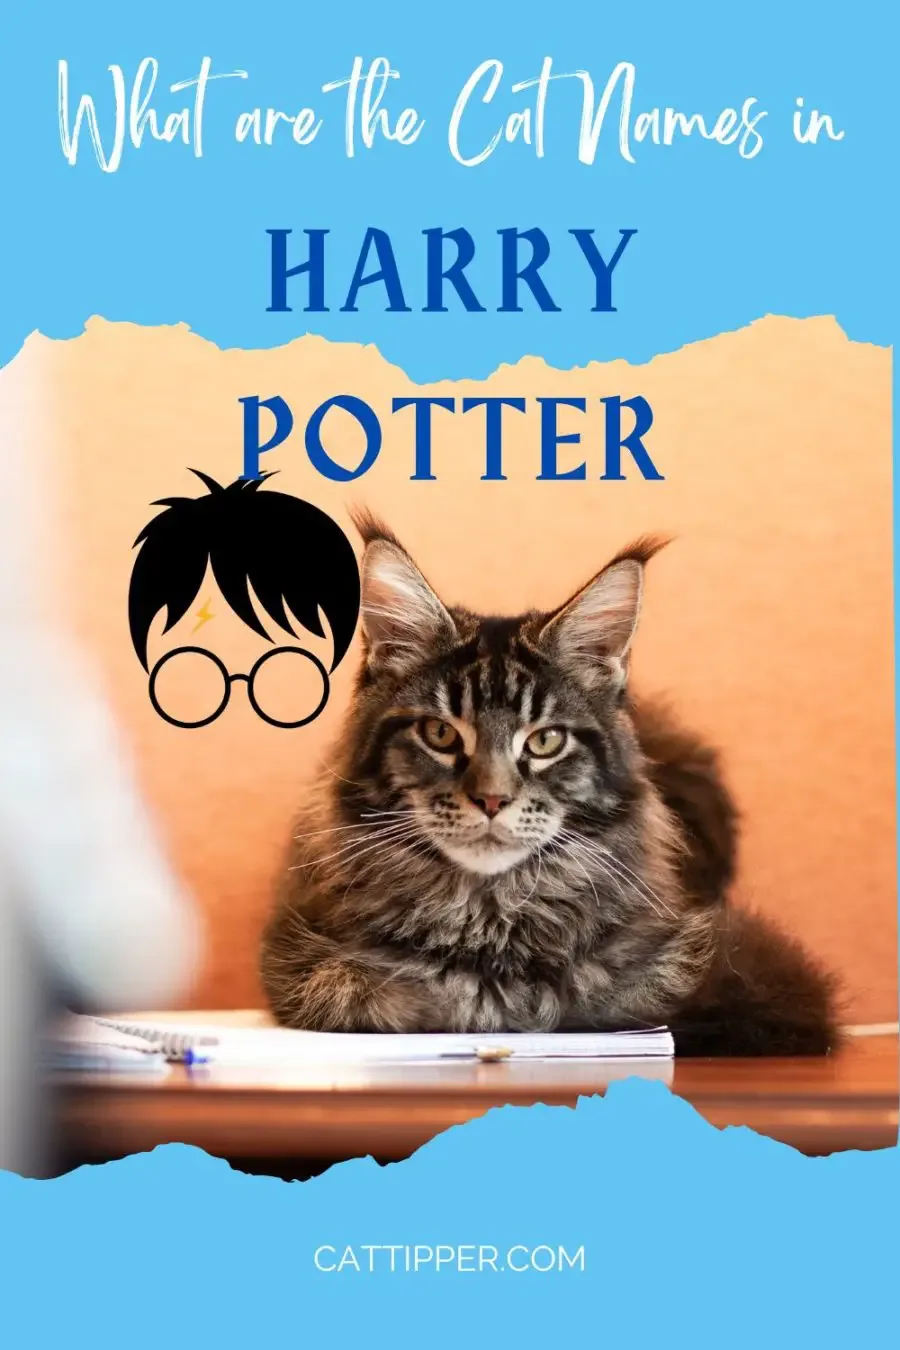 Pinterest pin on What are the cat names of Harry Potter showing a Maine Coon cat and a graphic representing Harry Potter